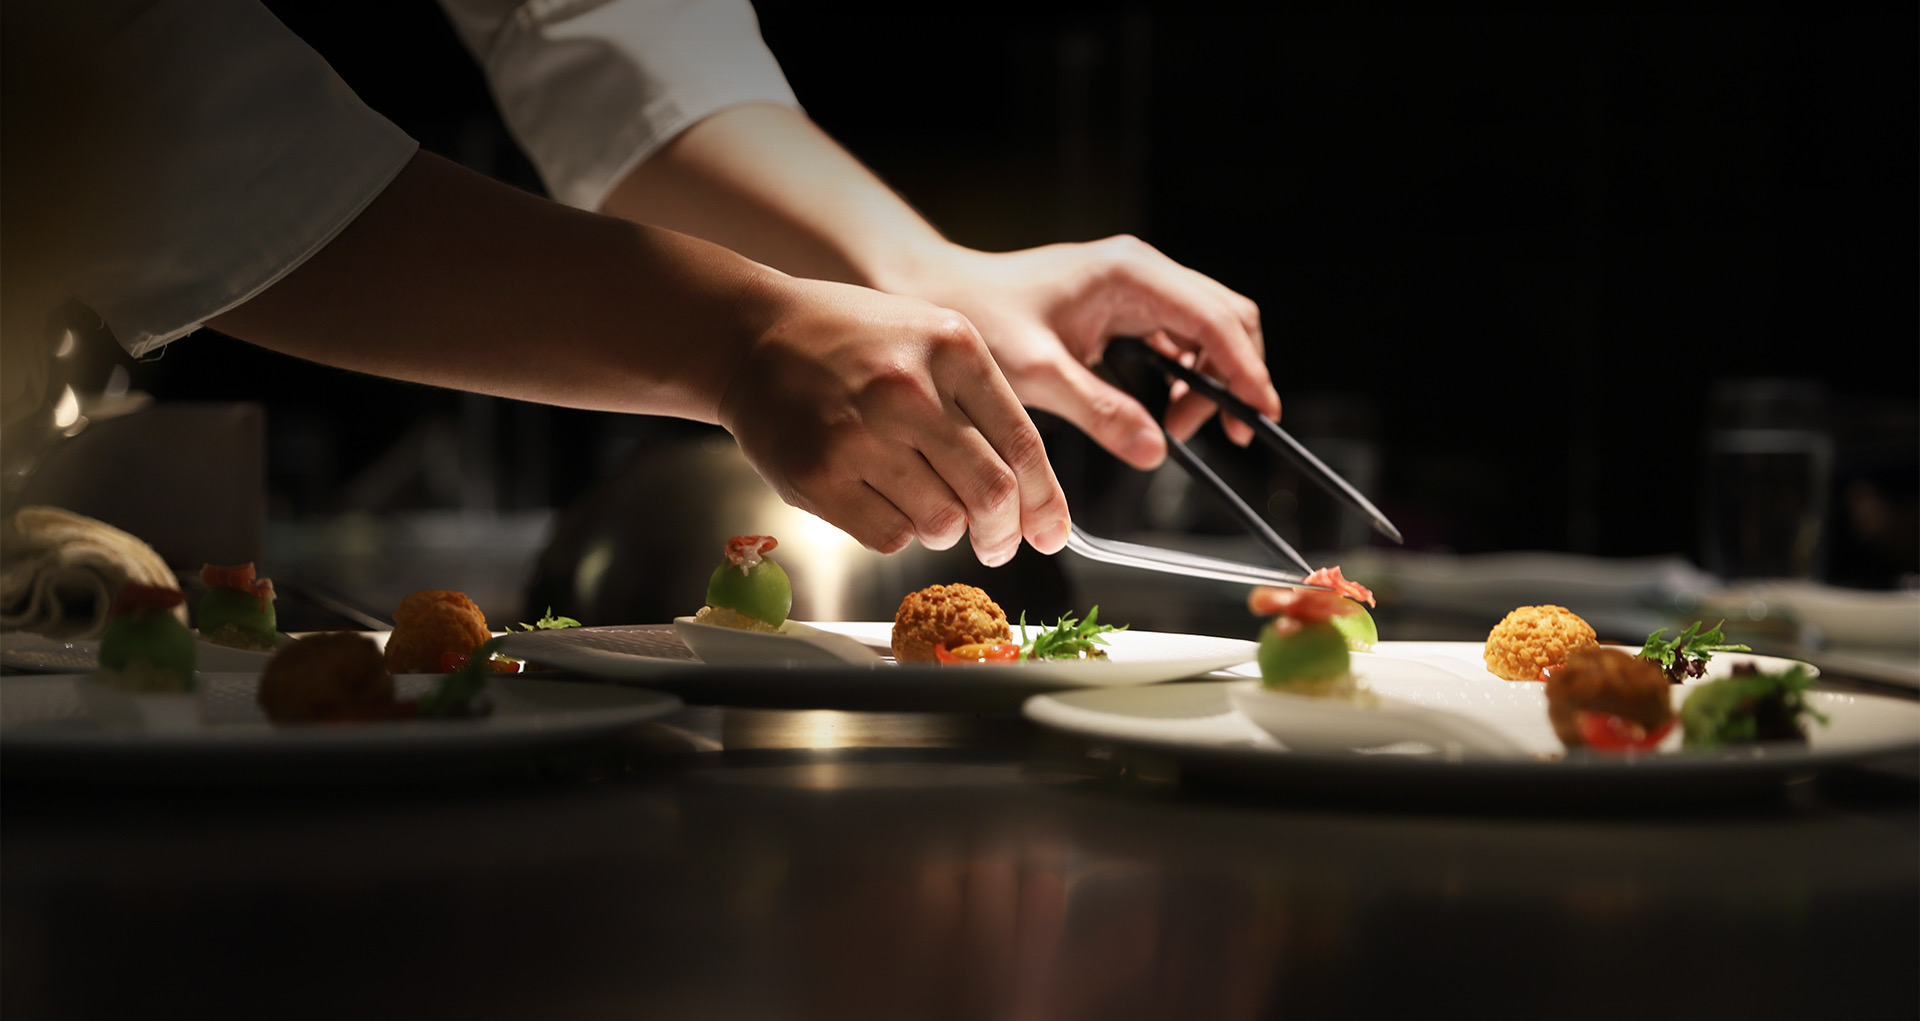 the chef carefully placing the garnish on top of the dishes with professional tools